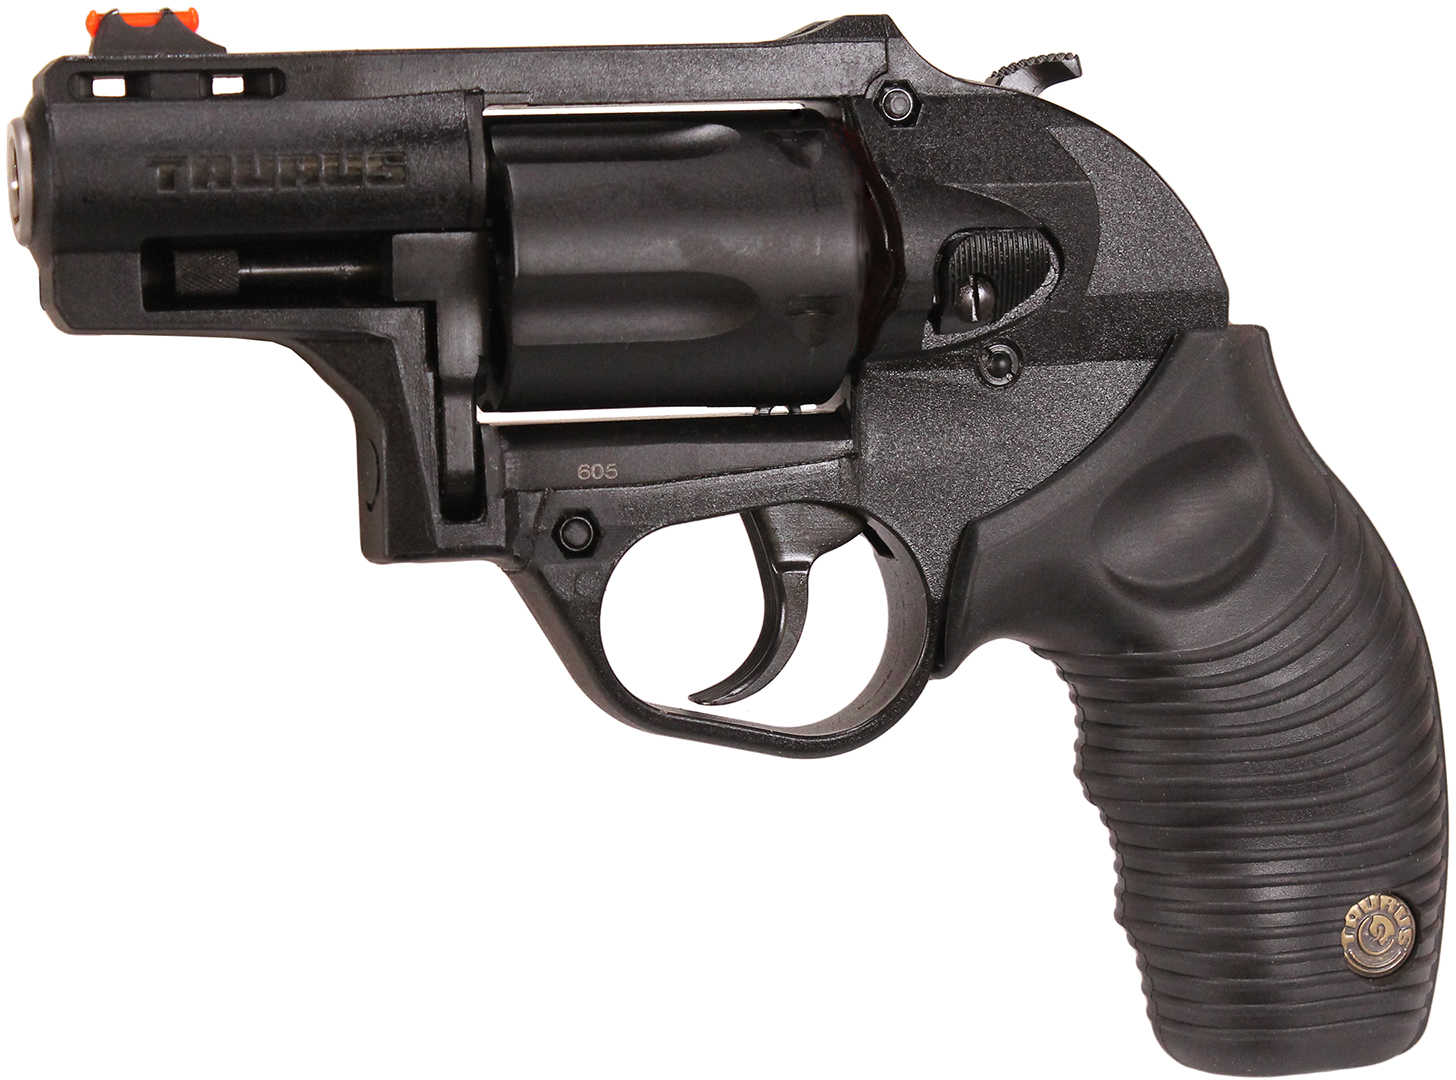 Taurus 605 Protector Polymer Double Action Revolver 357 Magnum 2 Barrel 5 Rounds Blue Finish